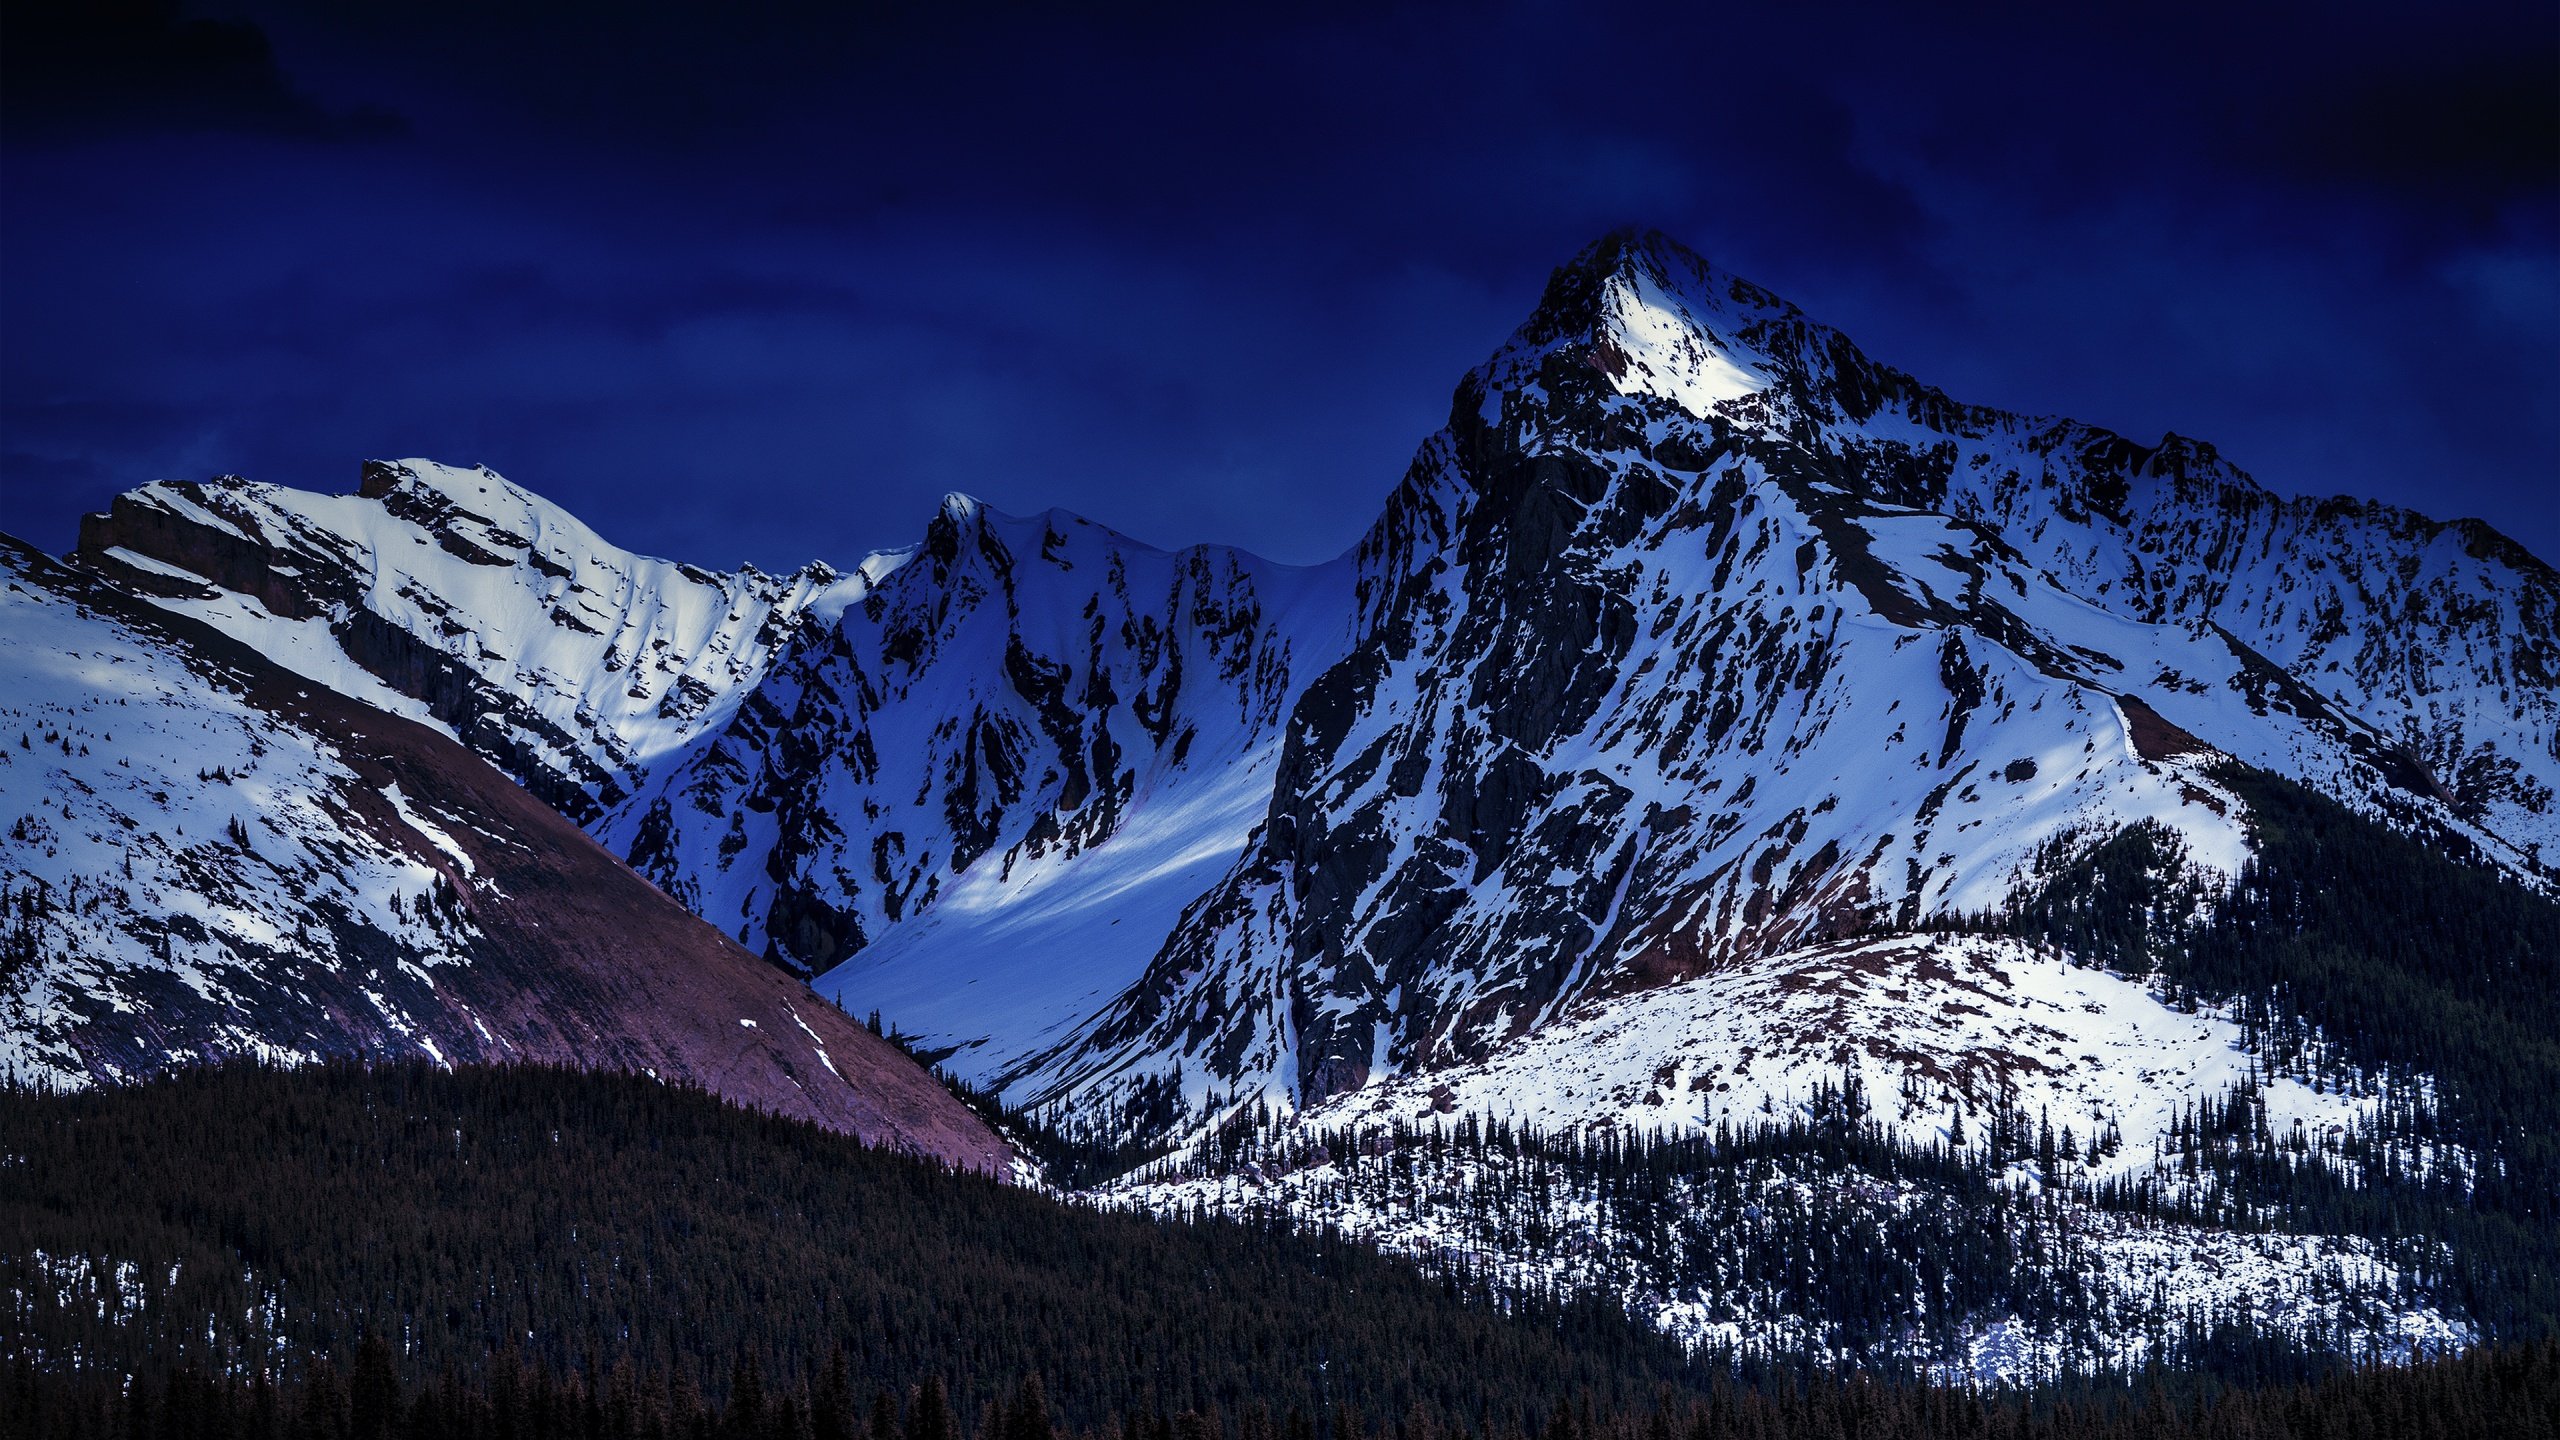 Glacier mountains Wallpaper 4K, Snow covered, Dark Sky, Green Trees, Nature